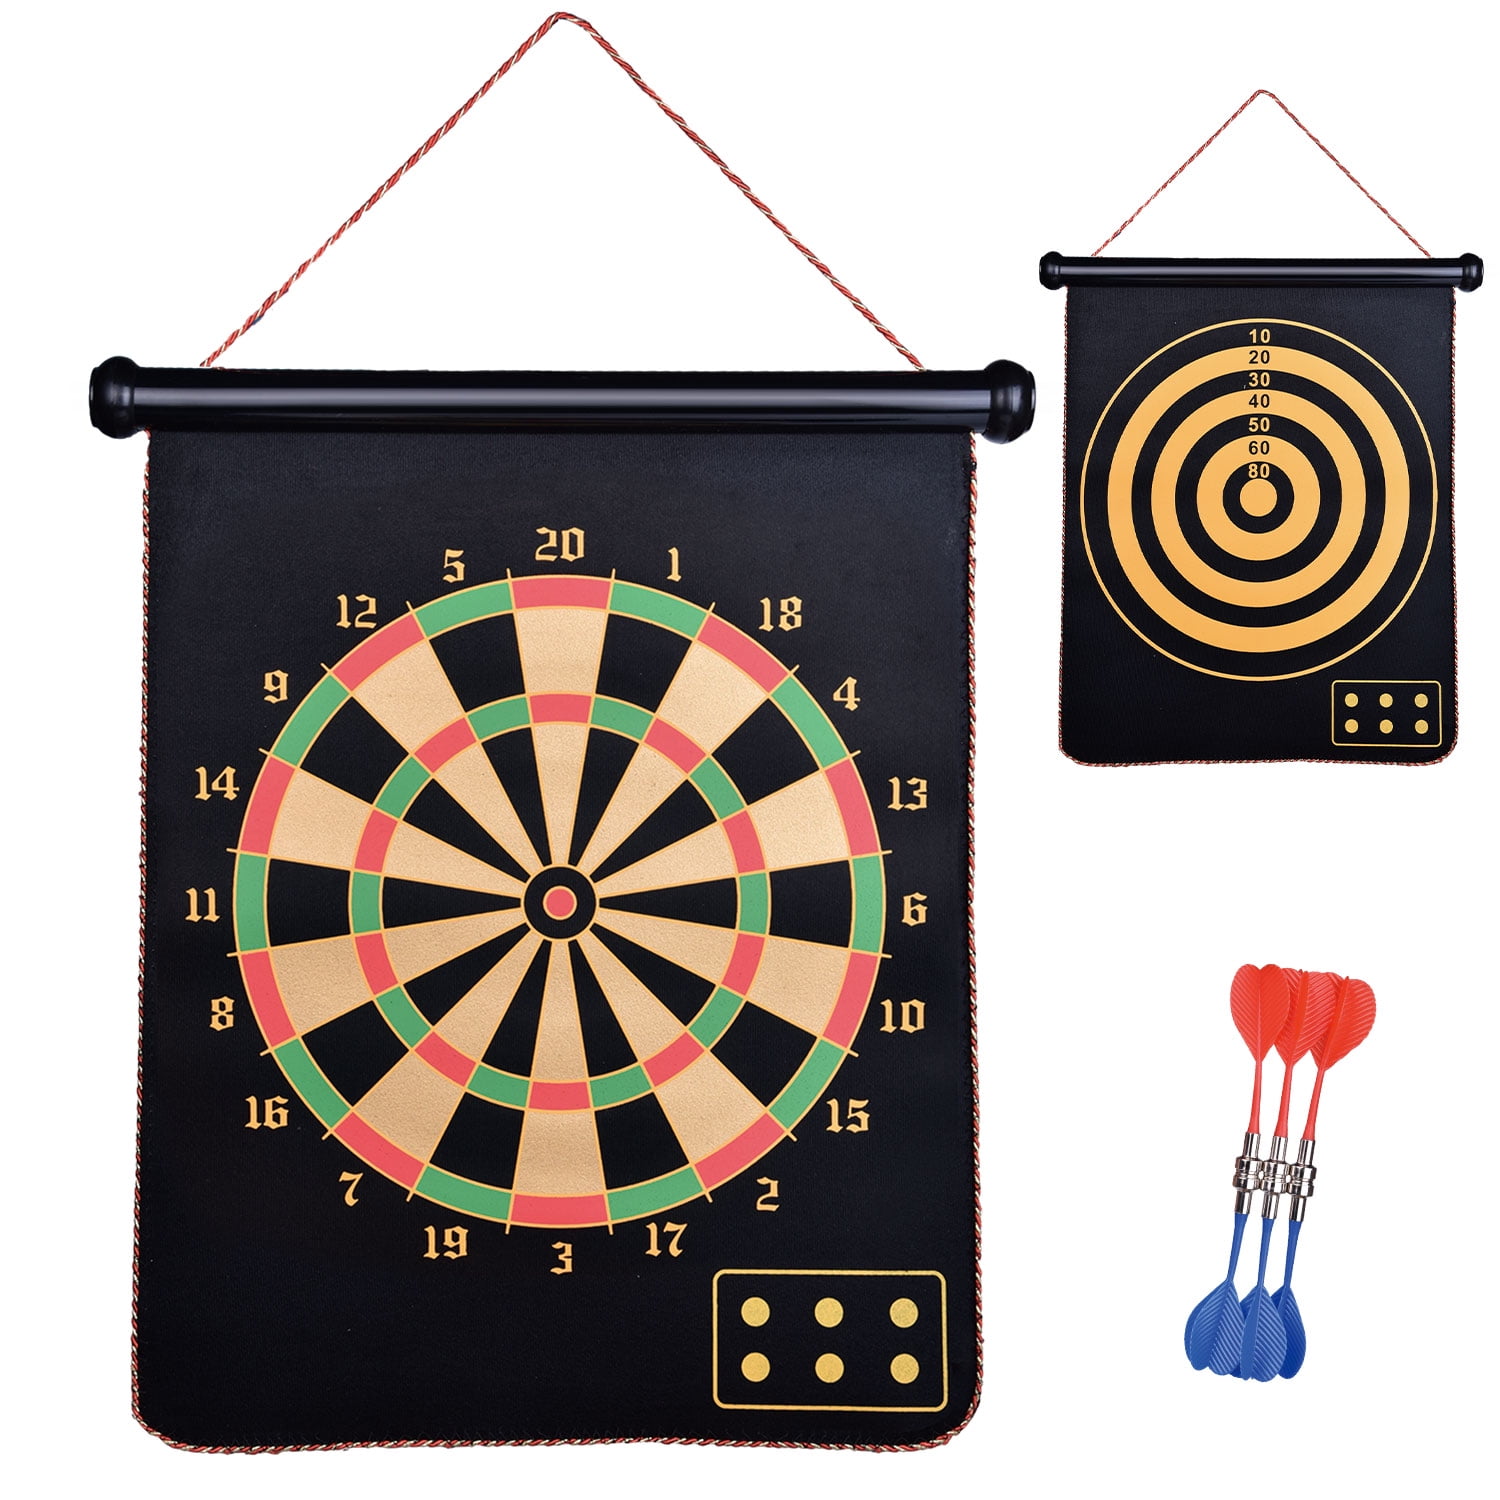 18" Dart Board Magnetic Double Sided Roll Adults Children Archery Target 6 Darts 